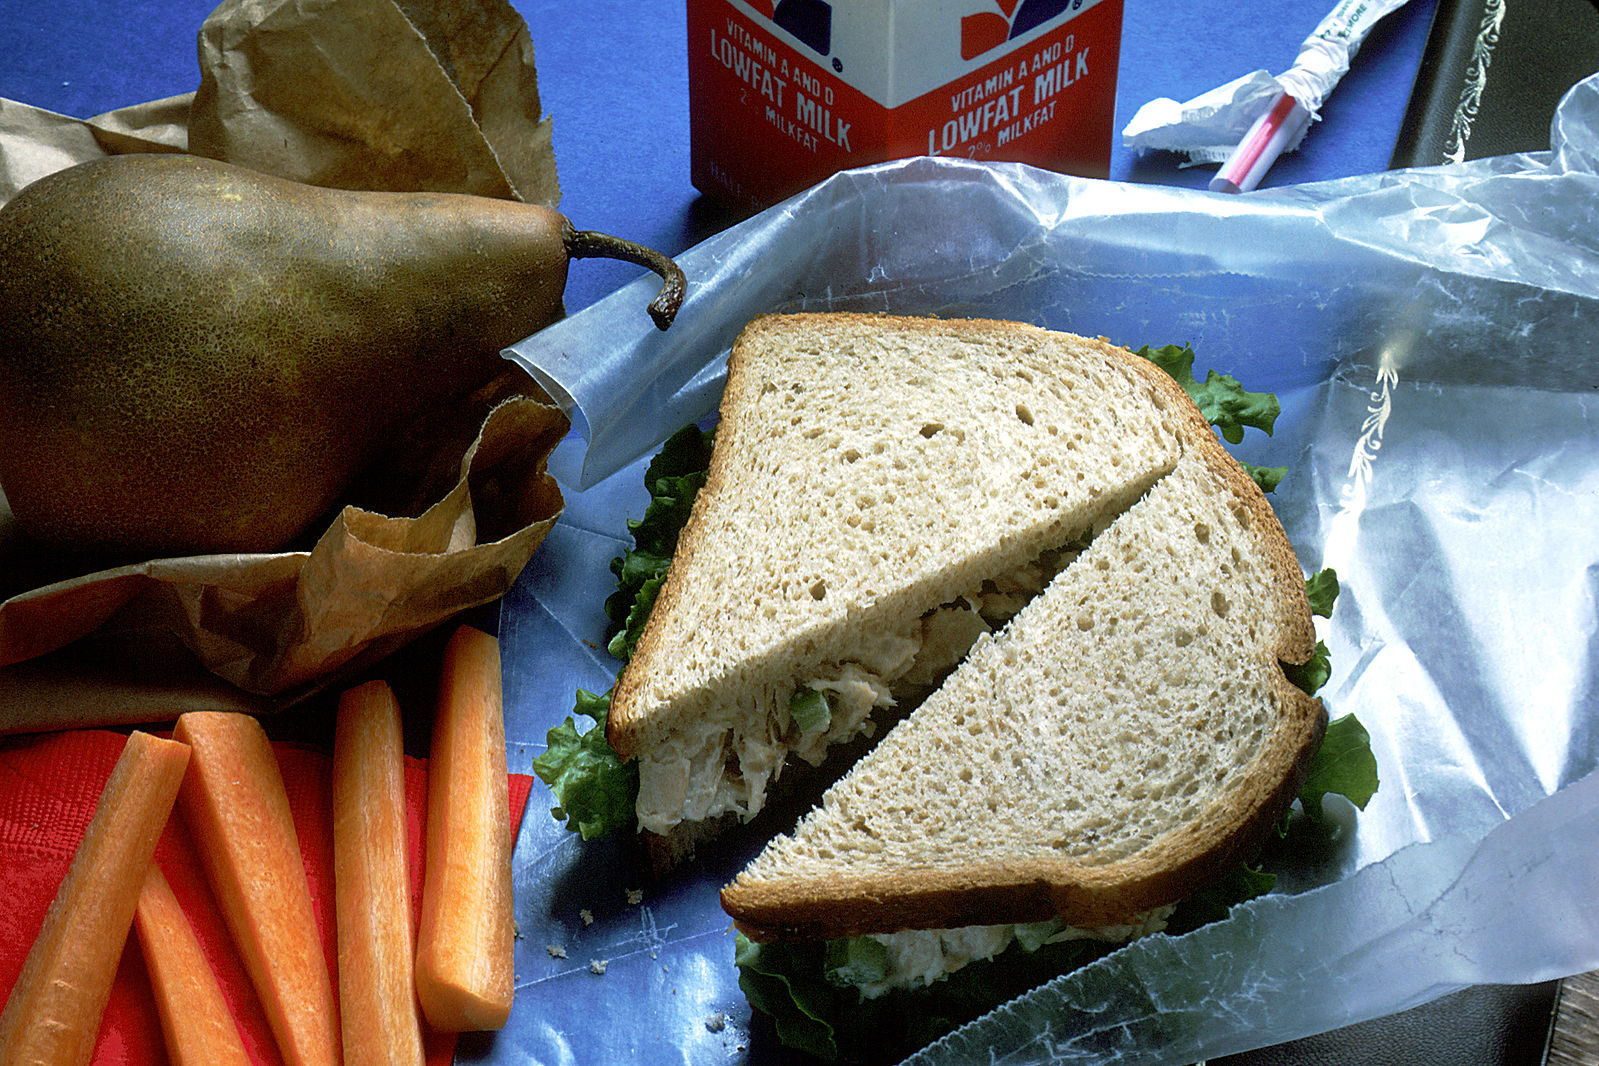 "A lunch sits on a blue tablecloth with a brown paper bag and red napkin. There are carrots, a pear, a sandwich on wheat bread with lettuce (chicken salad) and a carton of milk." Image courtesy the National Cancer Institute, 1989, via Wikipedia.